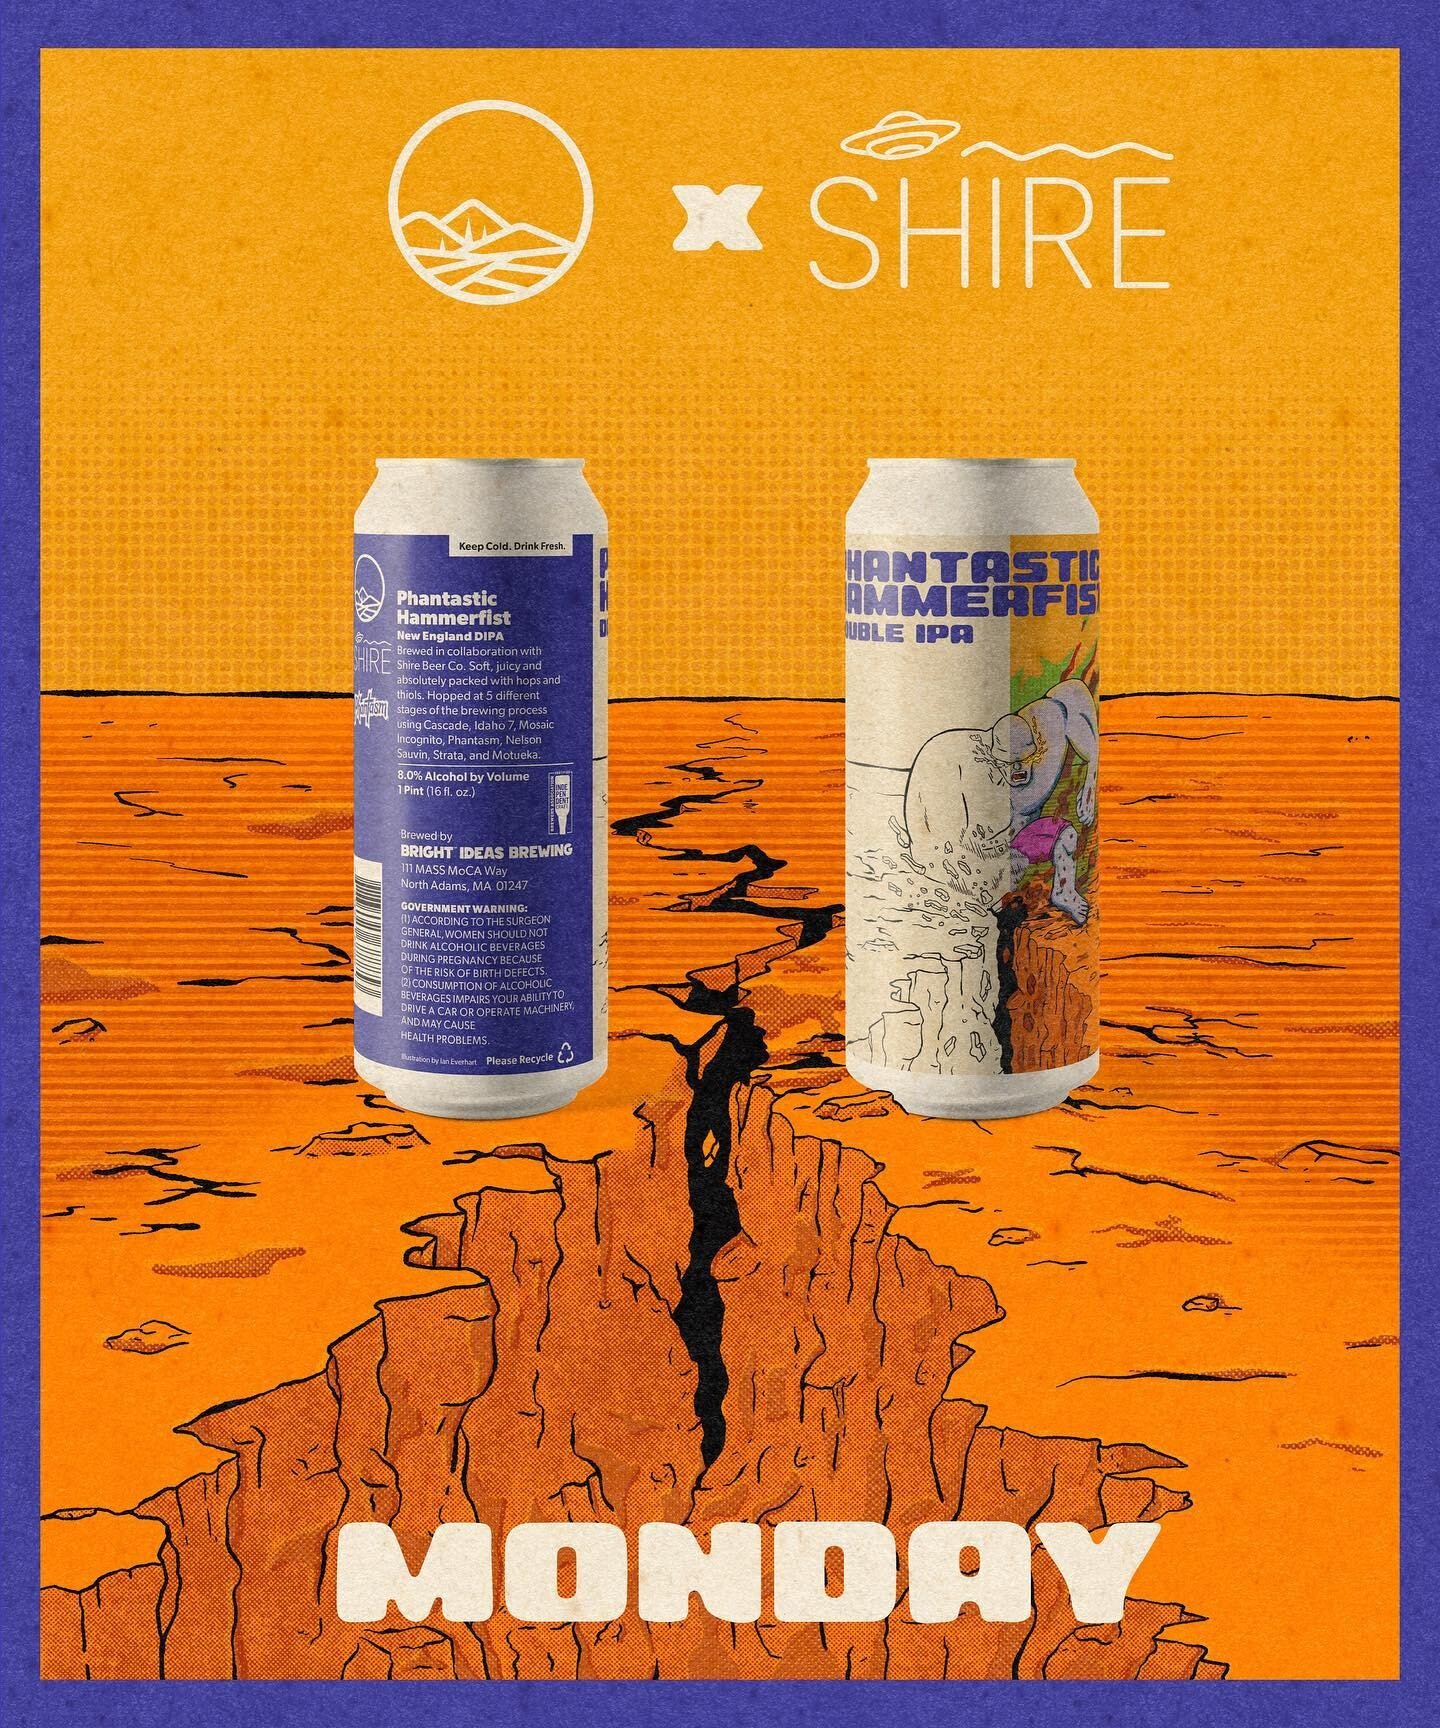 😍👊 Our friends at @brightideasbrewing will be releasing this bad boy on Monday. Hope everyone is ready to taste this next-level collab brew!

#shirebeerco #shirebeer #brightideasbrewing #getrightdrinkbright #mabeer #intheberkshires #beercollab